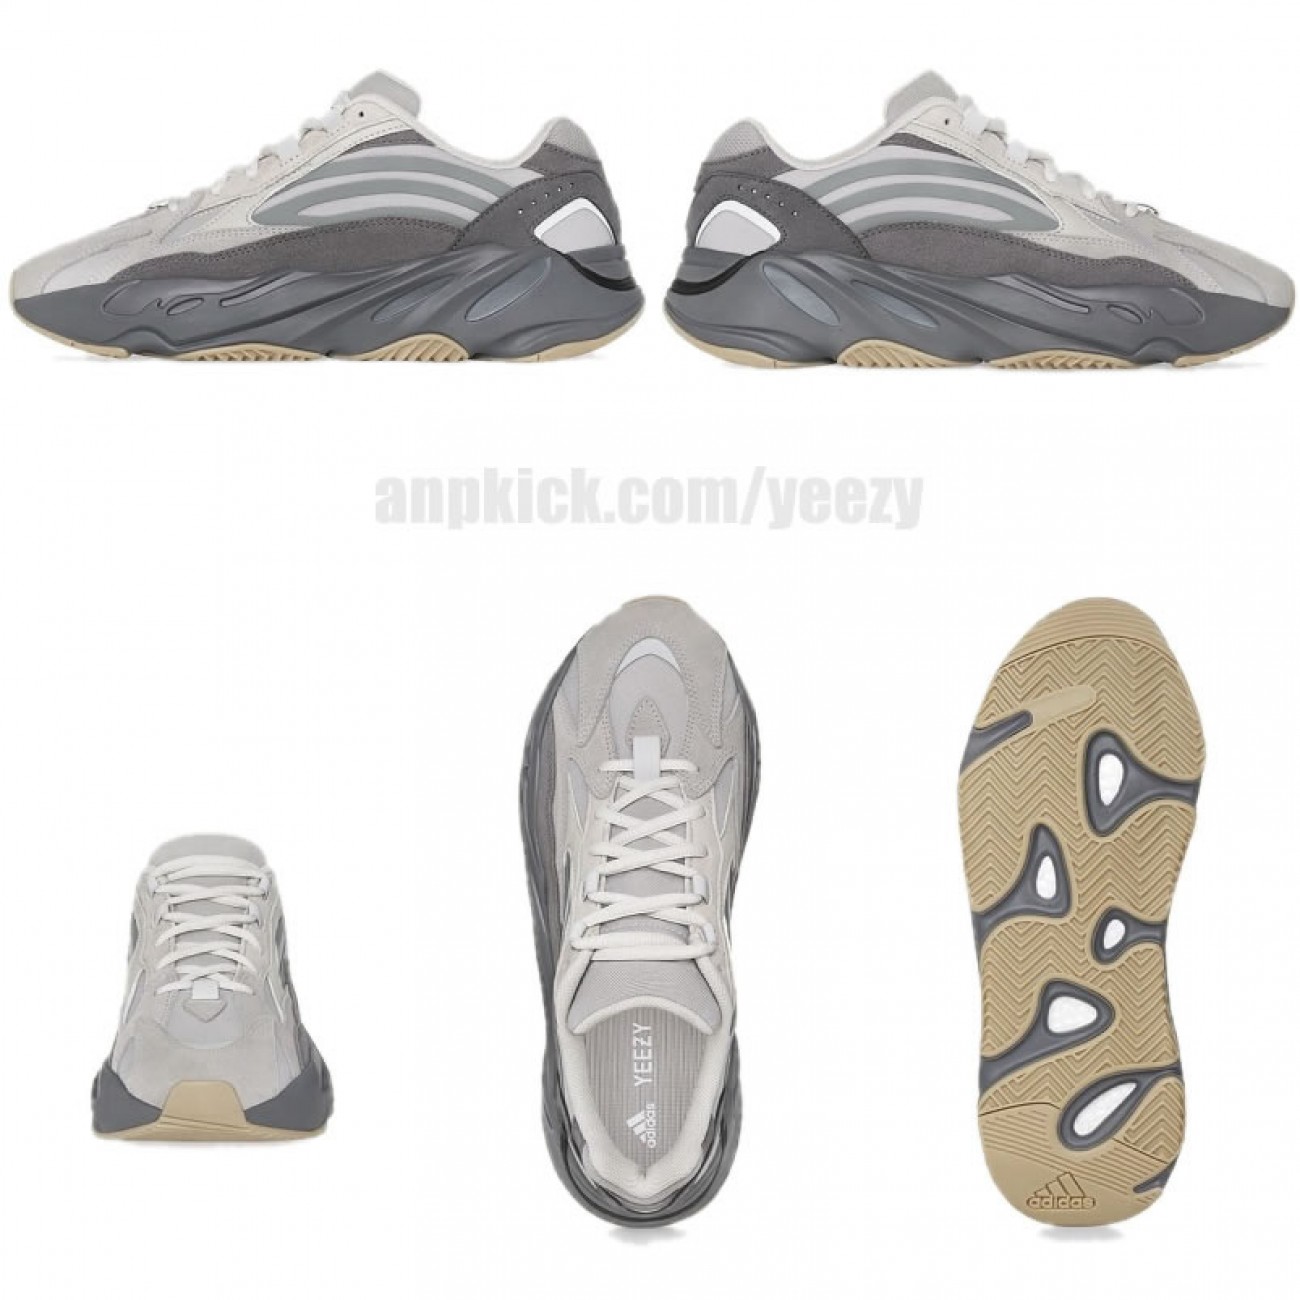 adidas Yeezy Boost 700 V2 "Tephra" On Feet Outfit Style FU7914